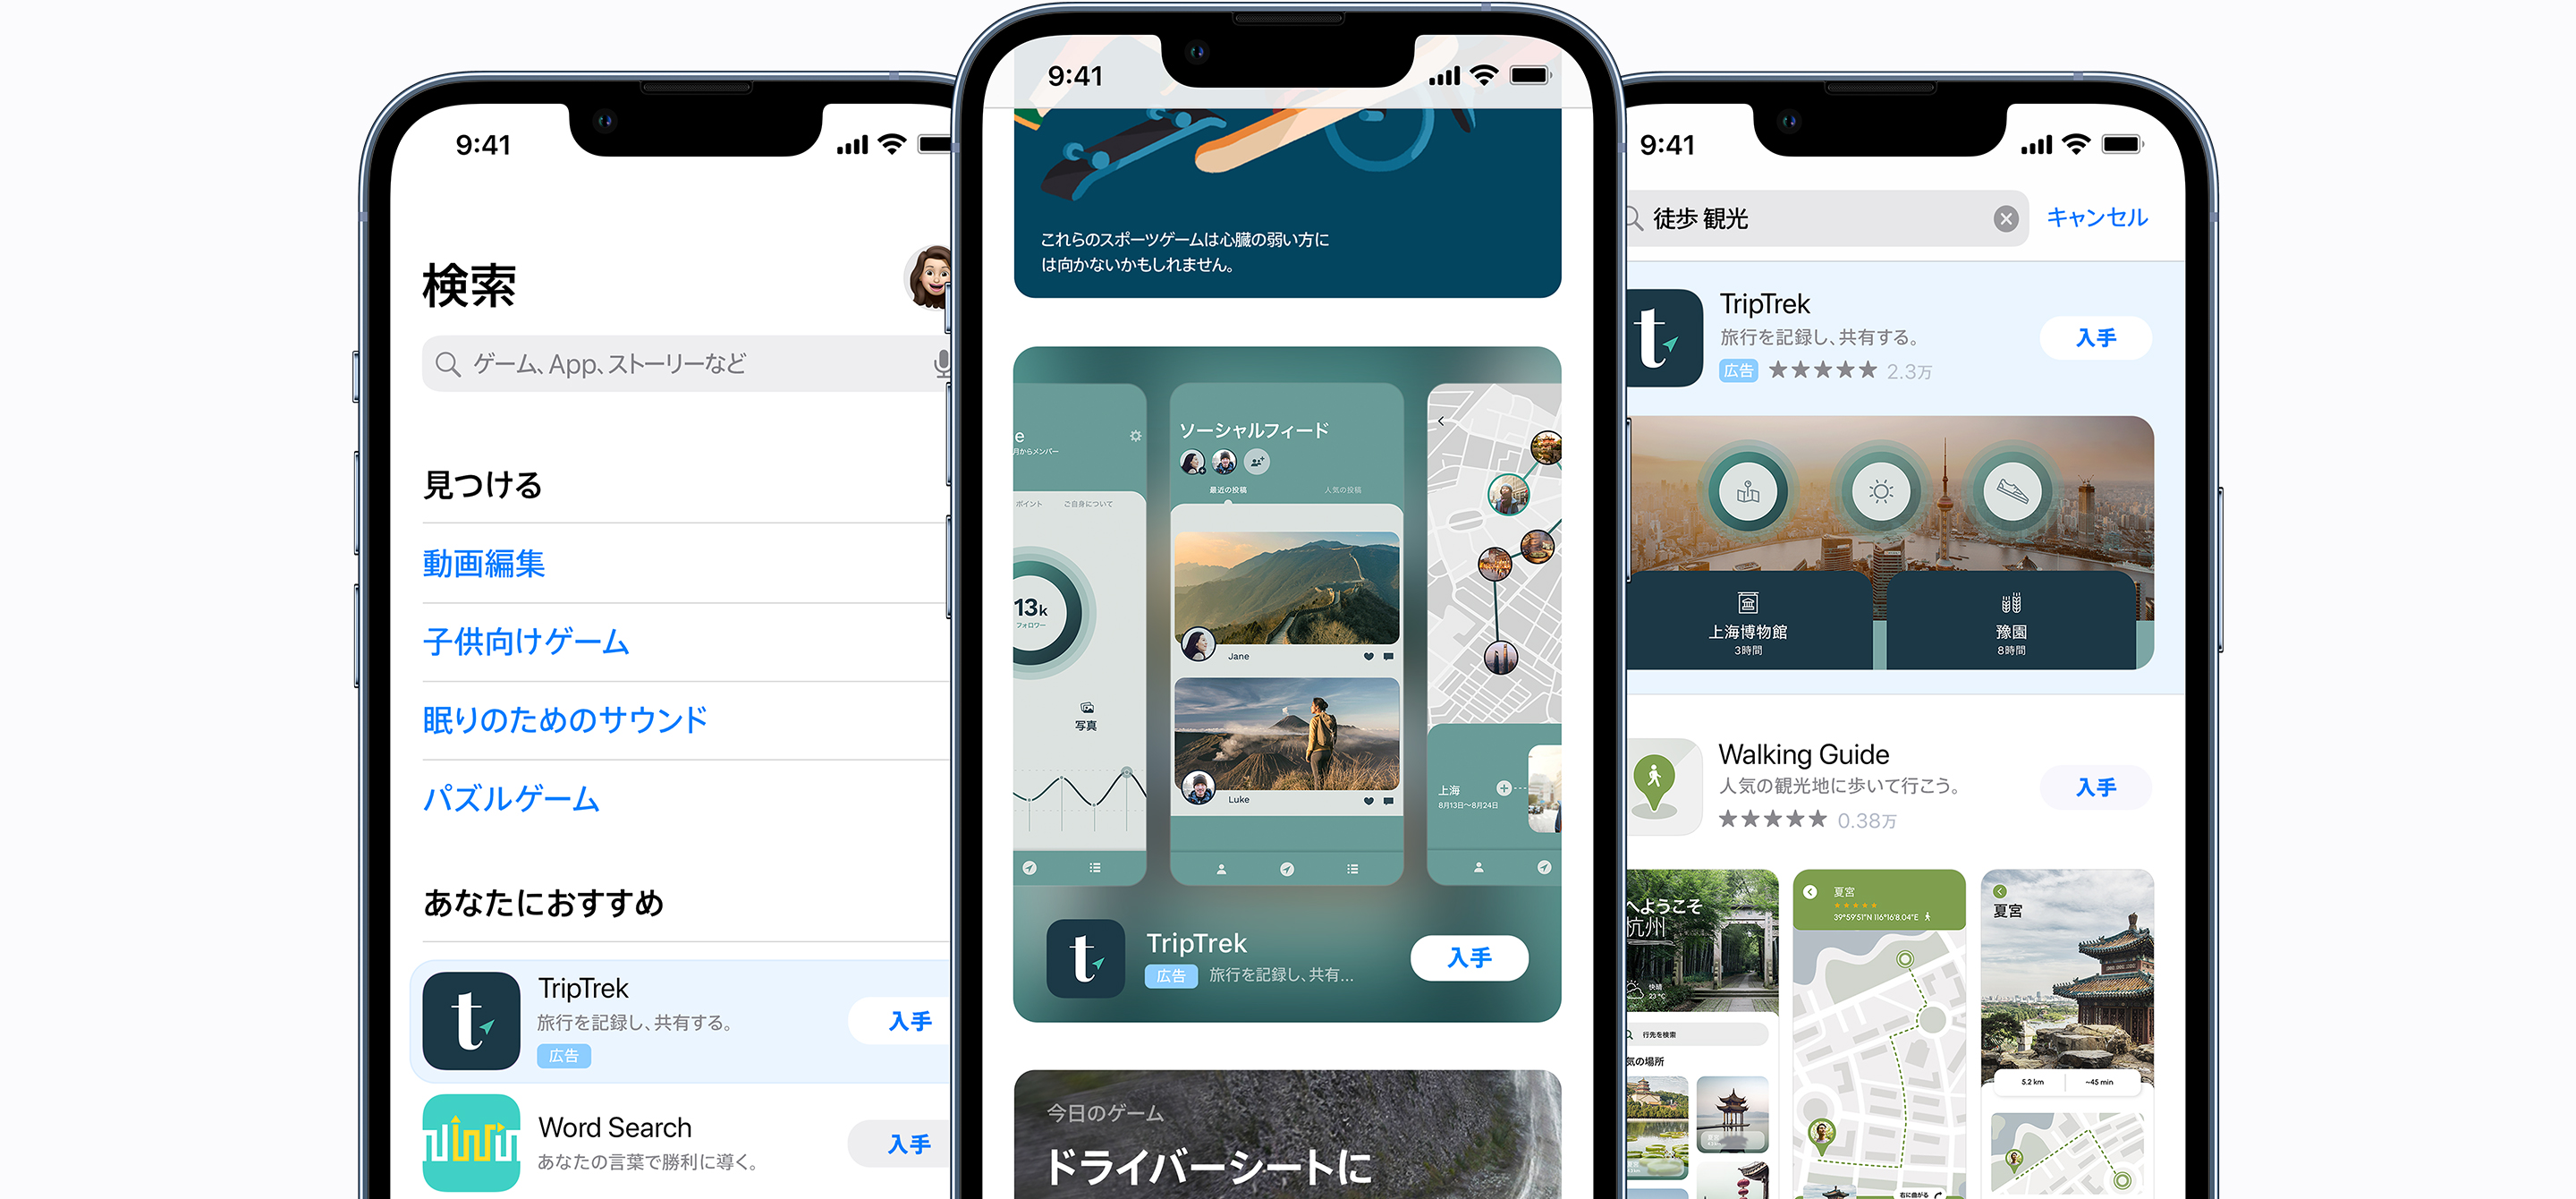 App StoreでのSearch tab広告、Search results広告、Today tab広告、Product Page広告の例